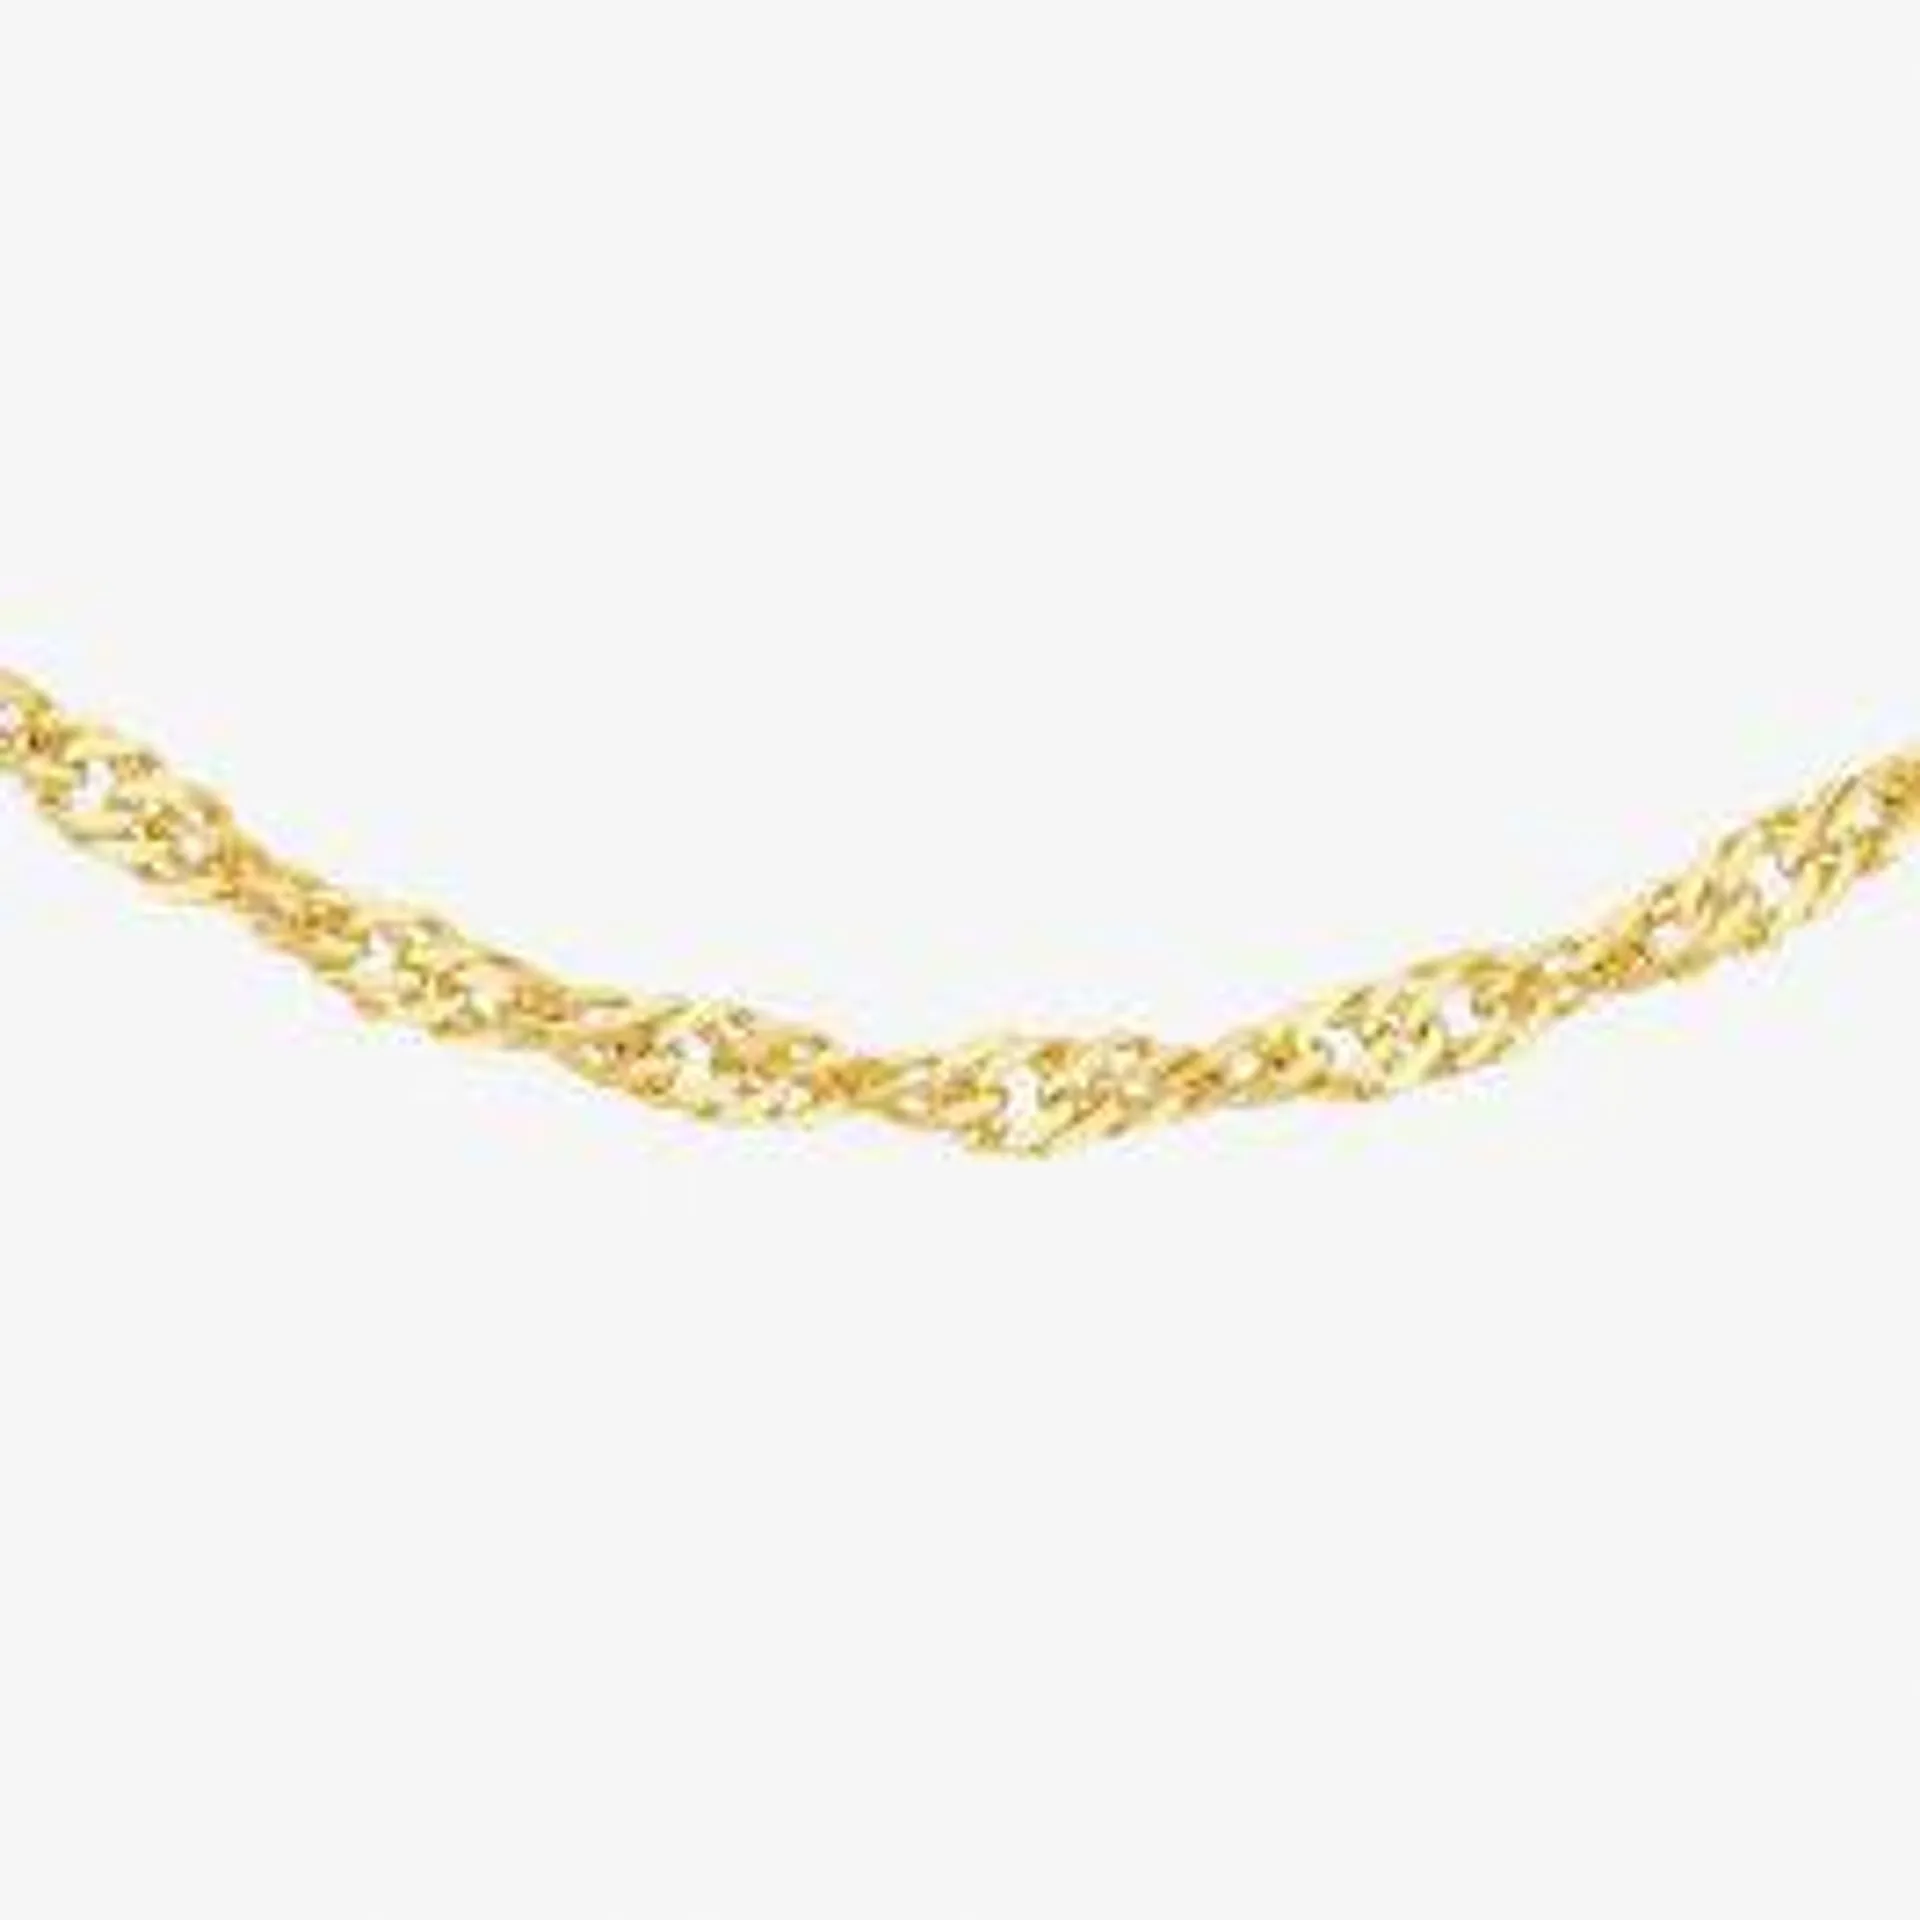 9ct Yellow Gold Diamond-Cut Twisted Curb Chain 1.13.0464